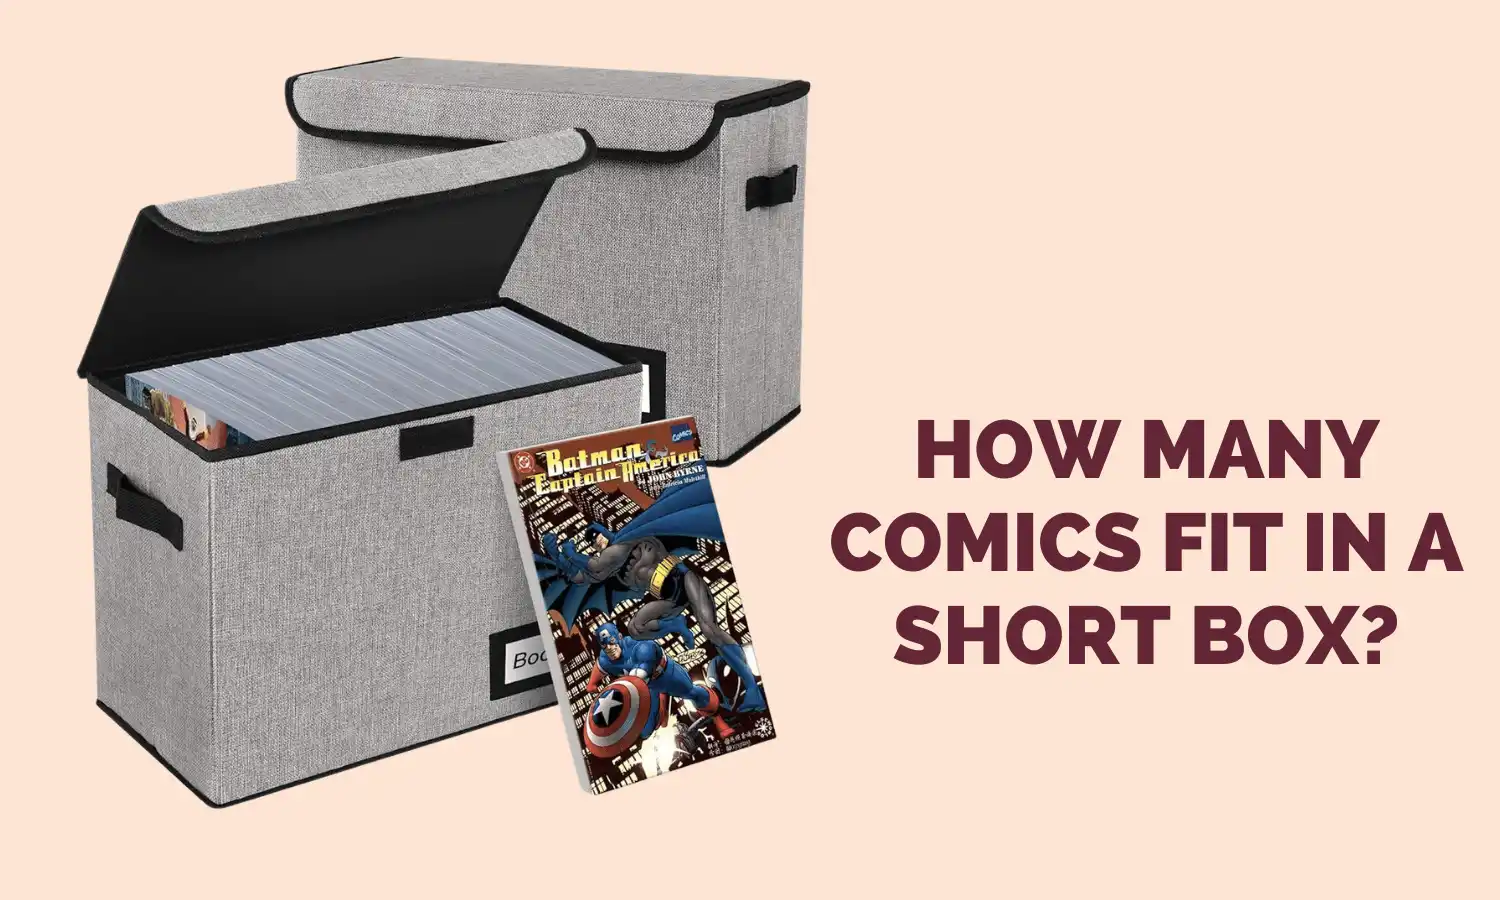 How Many Comics Fit in a Short Box?